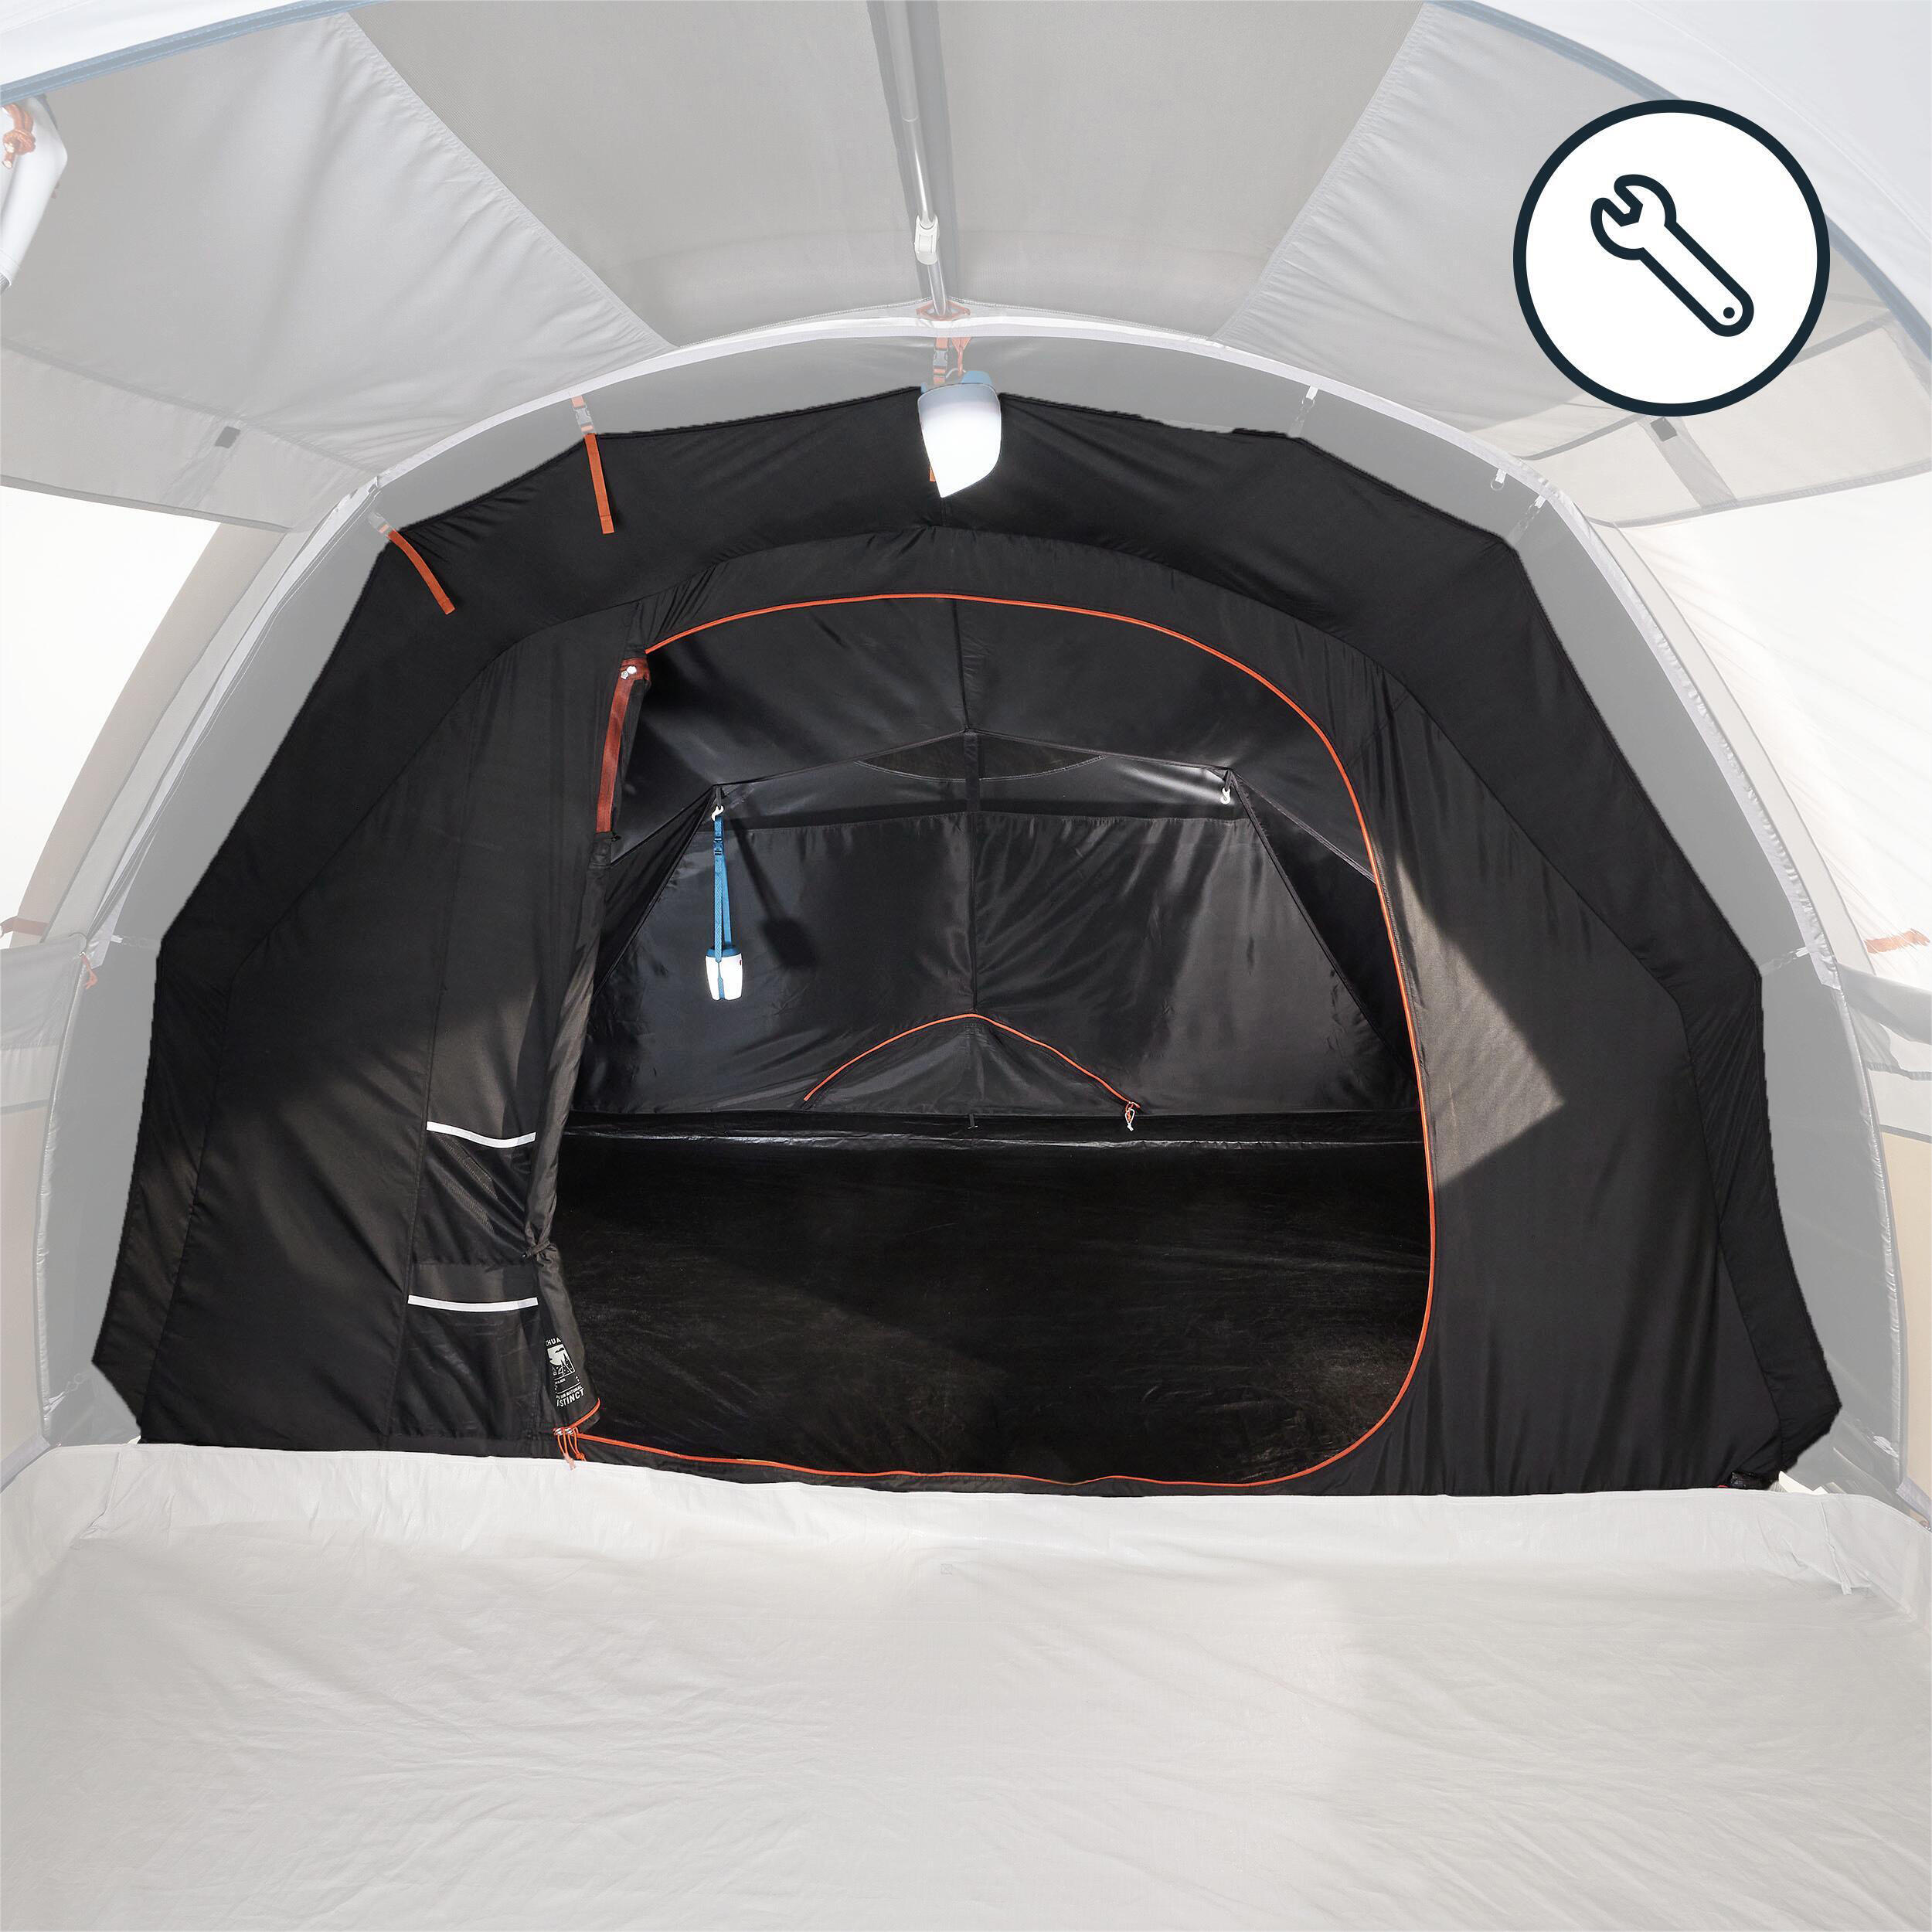 QUECHUA BEDROOM - REPLACEMENT PART FOR THE AIR SECONDS 4.1 FRESH&BLACK TENT